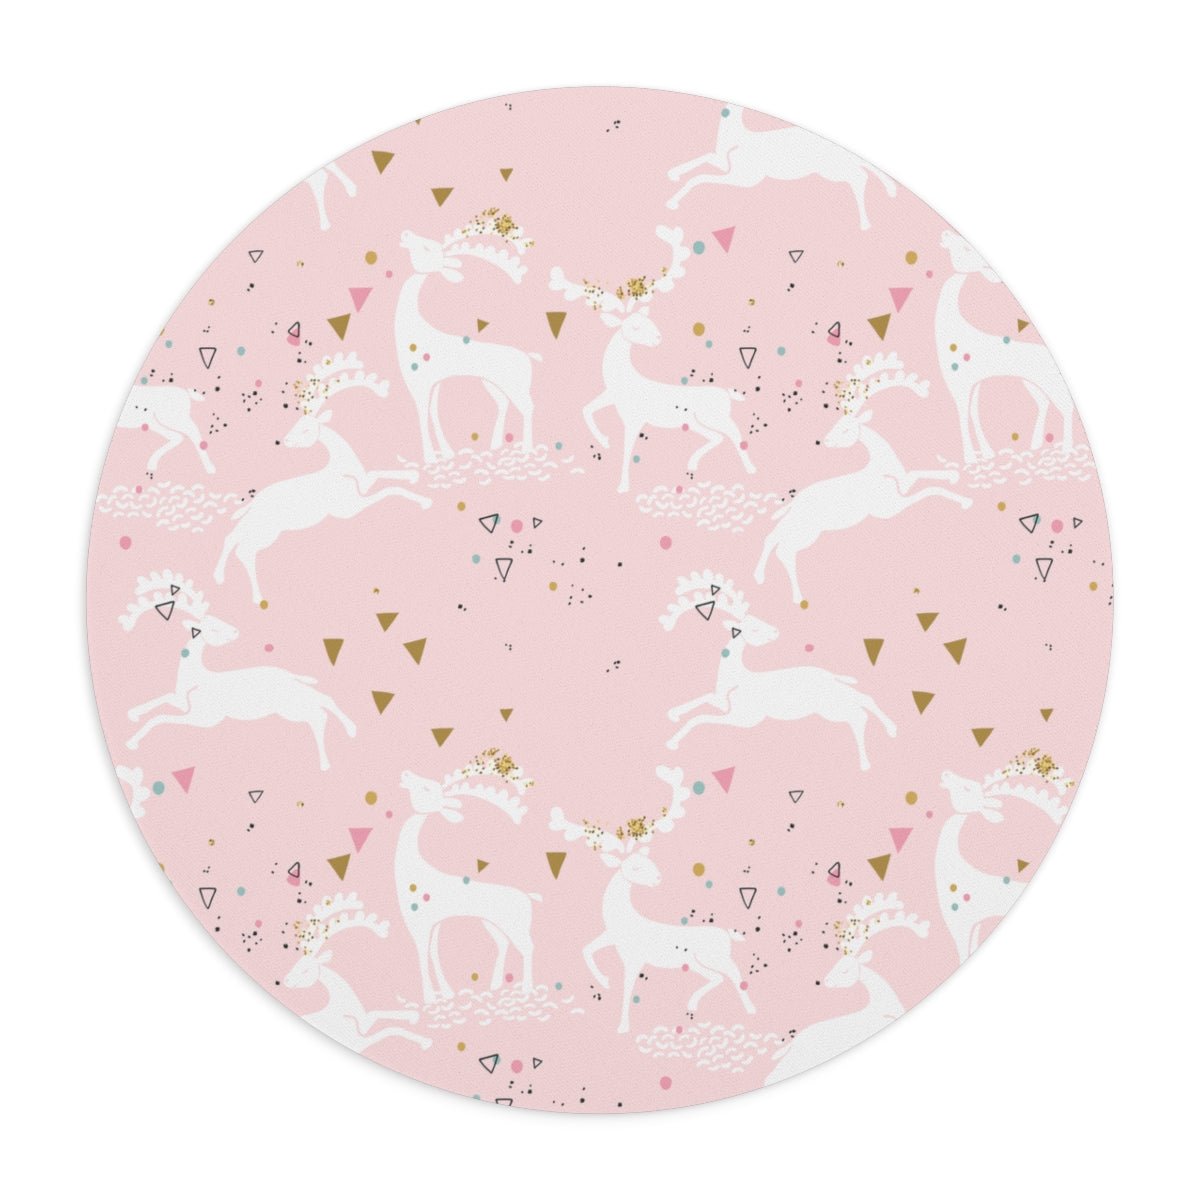 Magical Reindeers Mouse Pad - Puffin Lime